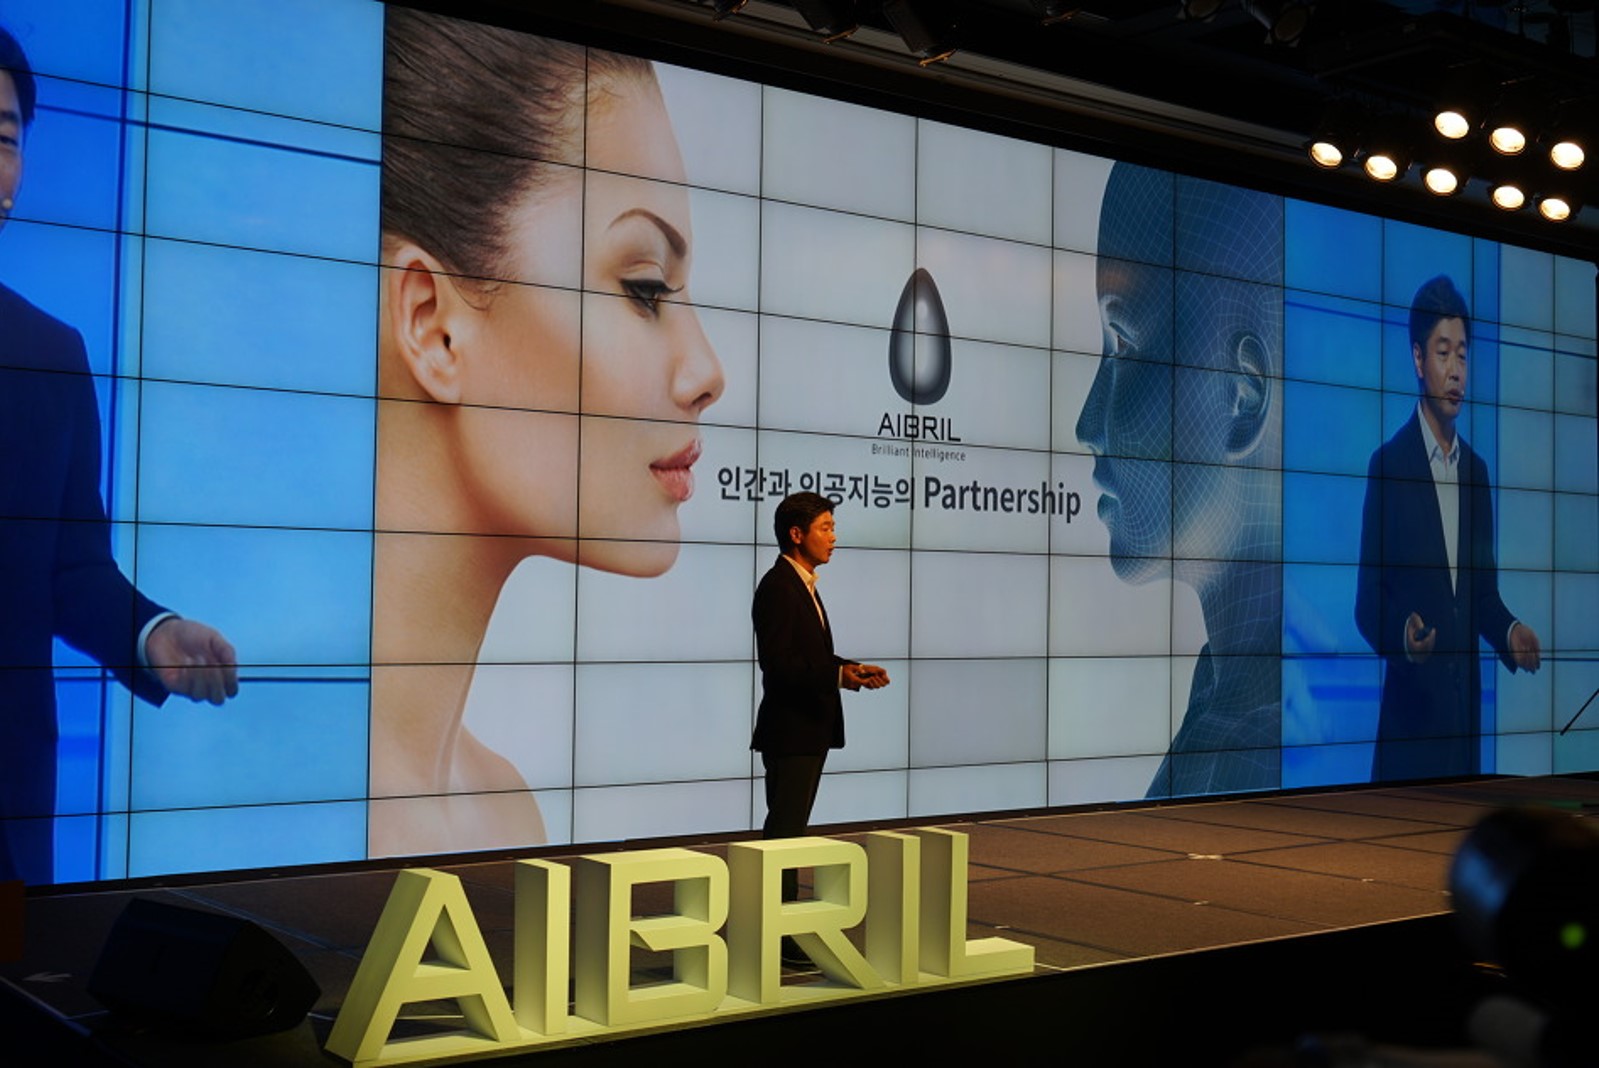 AIBRIL OPENING DAY